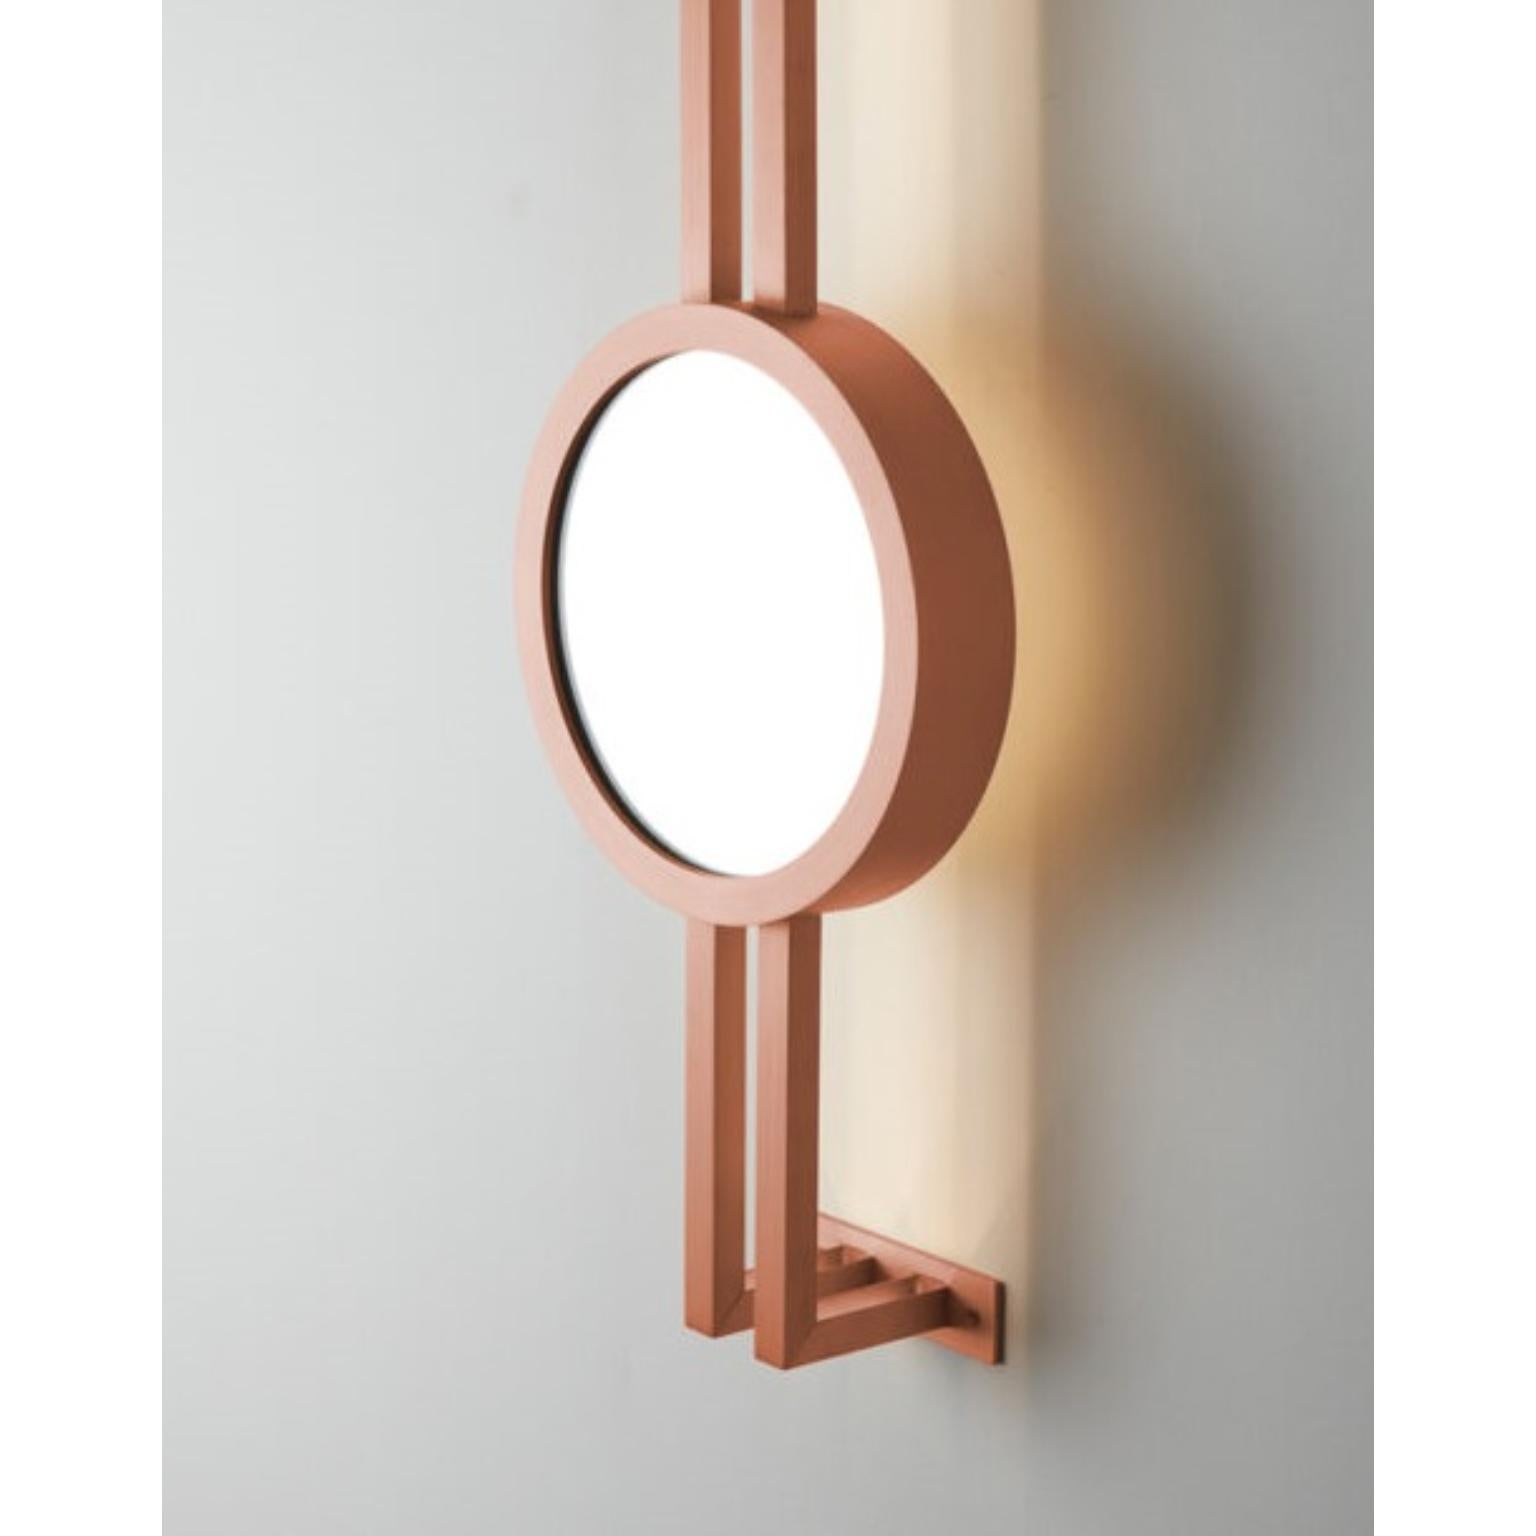 Mandolin Brushed Copper Wall Mounted Lamp by Carla Baz In New Condition For Sale In Geneve, CH